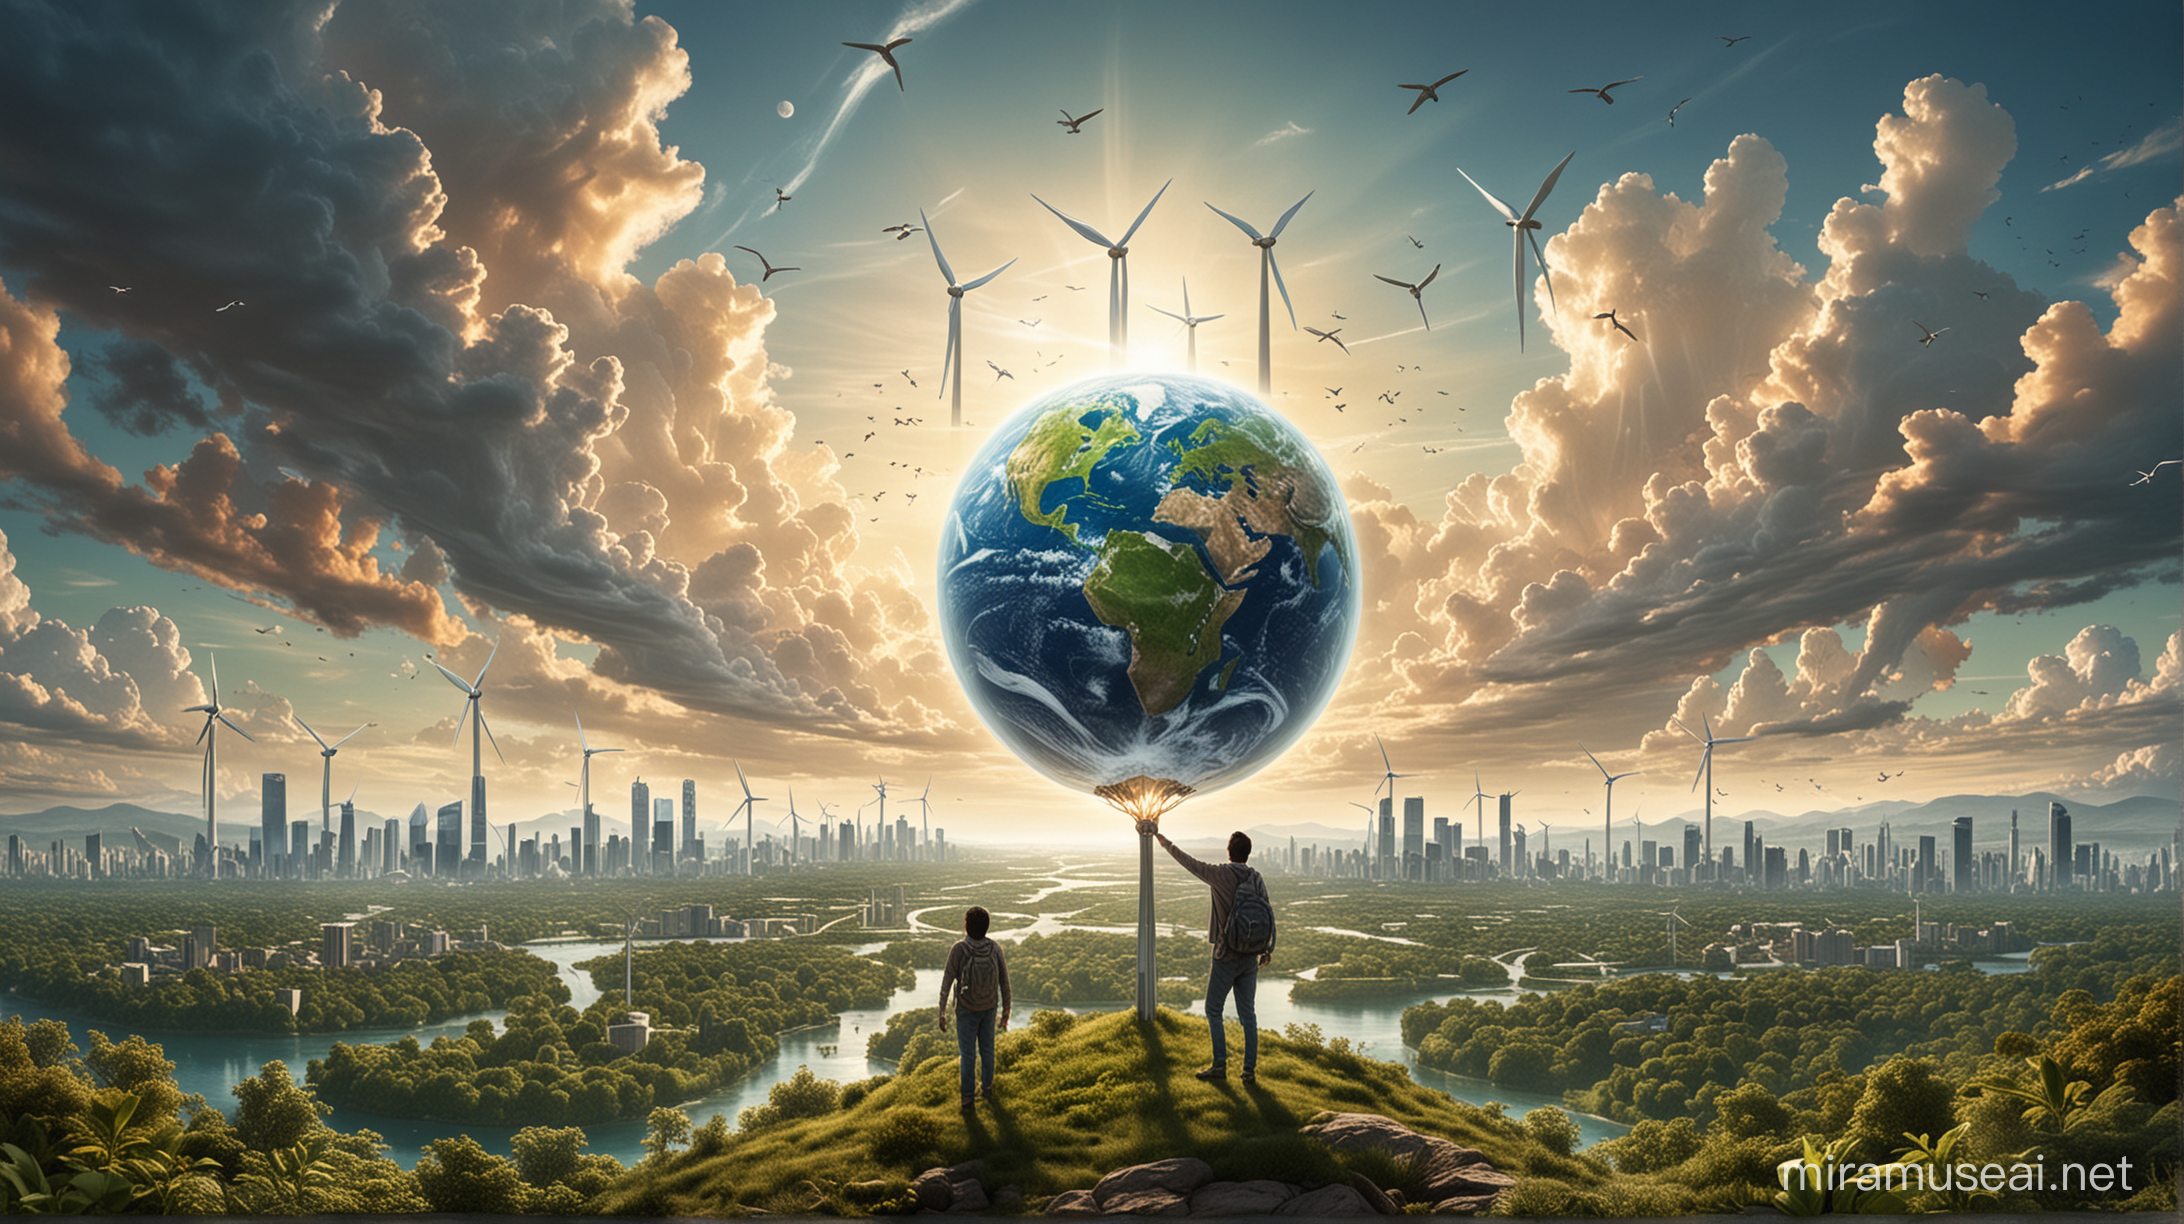 Create an inspiring and visionary image that embodies the spirit of a global movement towards sustainability and zero emissions. The image should visually narrate the profound connection between human action and the future of our planet, emphasizing the potential for individual contributions to foster a legacy of hope, transformation, and respect for all forms of life.

Foreground: Feature a diverse group of people from various backgrounds and ages, standing together, united. They are looking towards the horizon, symbolizing their collective vision for the future. Among them, a figure is highlighted, representing the viewer as the catalyst of change, holding a small, glowing earth in their hands, signifying hope and the power of individual action.

Background: Illustrate a vibrant and thriving Earth, split into two contrasting yet harmonious halves. On one side, depict a flourishing natural world, with lush forests, clean rivers, and abundant wildlife. On the other, show a futuristic, sustainable city with green buildings, renewable energy sources like wind turbines and solar panels, and people engaging in environmentally friendly activities.

Sky: In the sky above, draw a network of light connecting the people to the planet and the city, symbolizing the interconnectedness of humanity's actions and the health of our Earth. The network culminates in a bright, shining light on the horizon, representing the hopeful future achieved through collective sustainability efforts.

Caption: Beneath the image, include the phrase 'Be the Change. Ignite the Future.' to reinforce the call to action and the impact of joining the movement towards a Zero Emissions World.

The overall image should evoke a sense of urgency, responsibility, and optimism, inviting viewers to imagine themselves as essential participants in building a sustainable future for all.